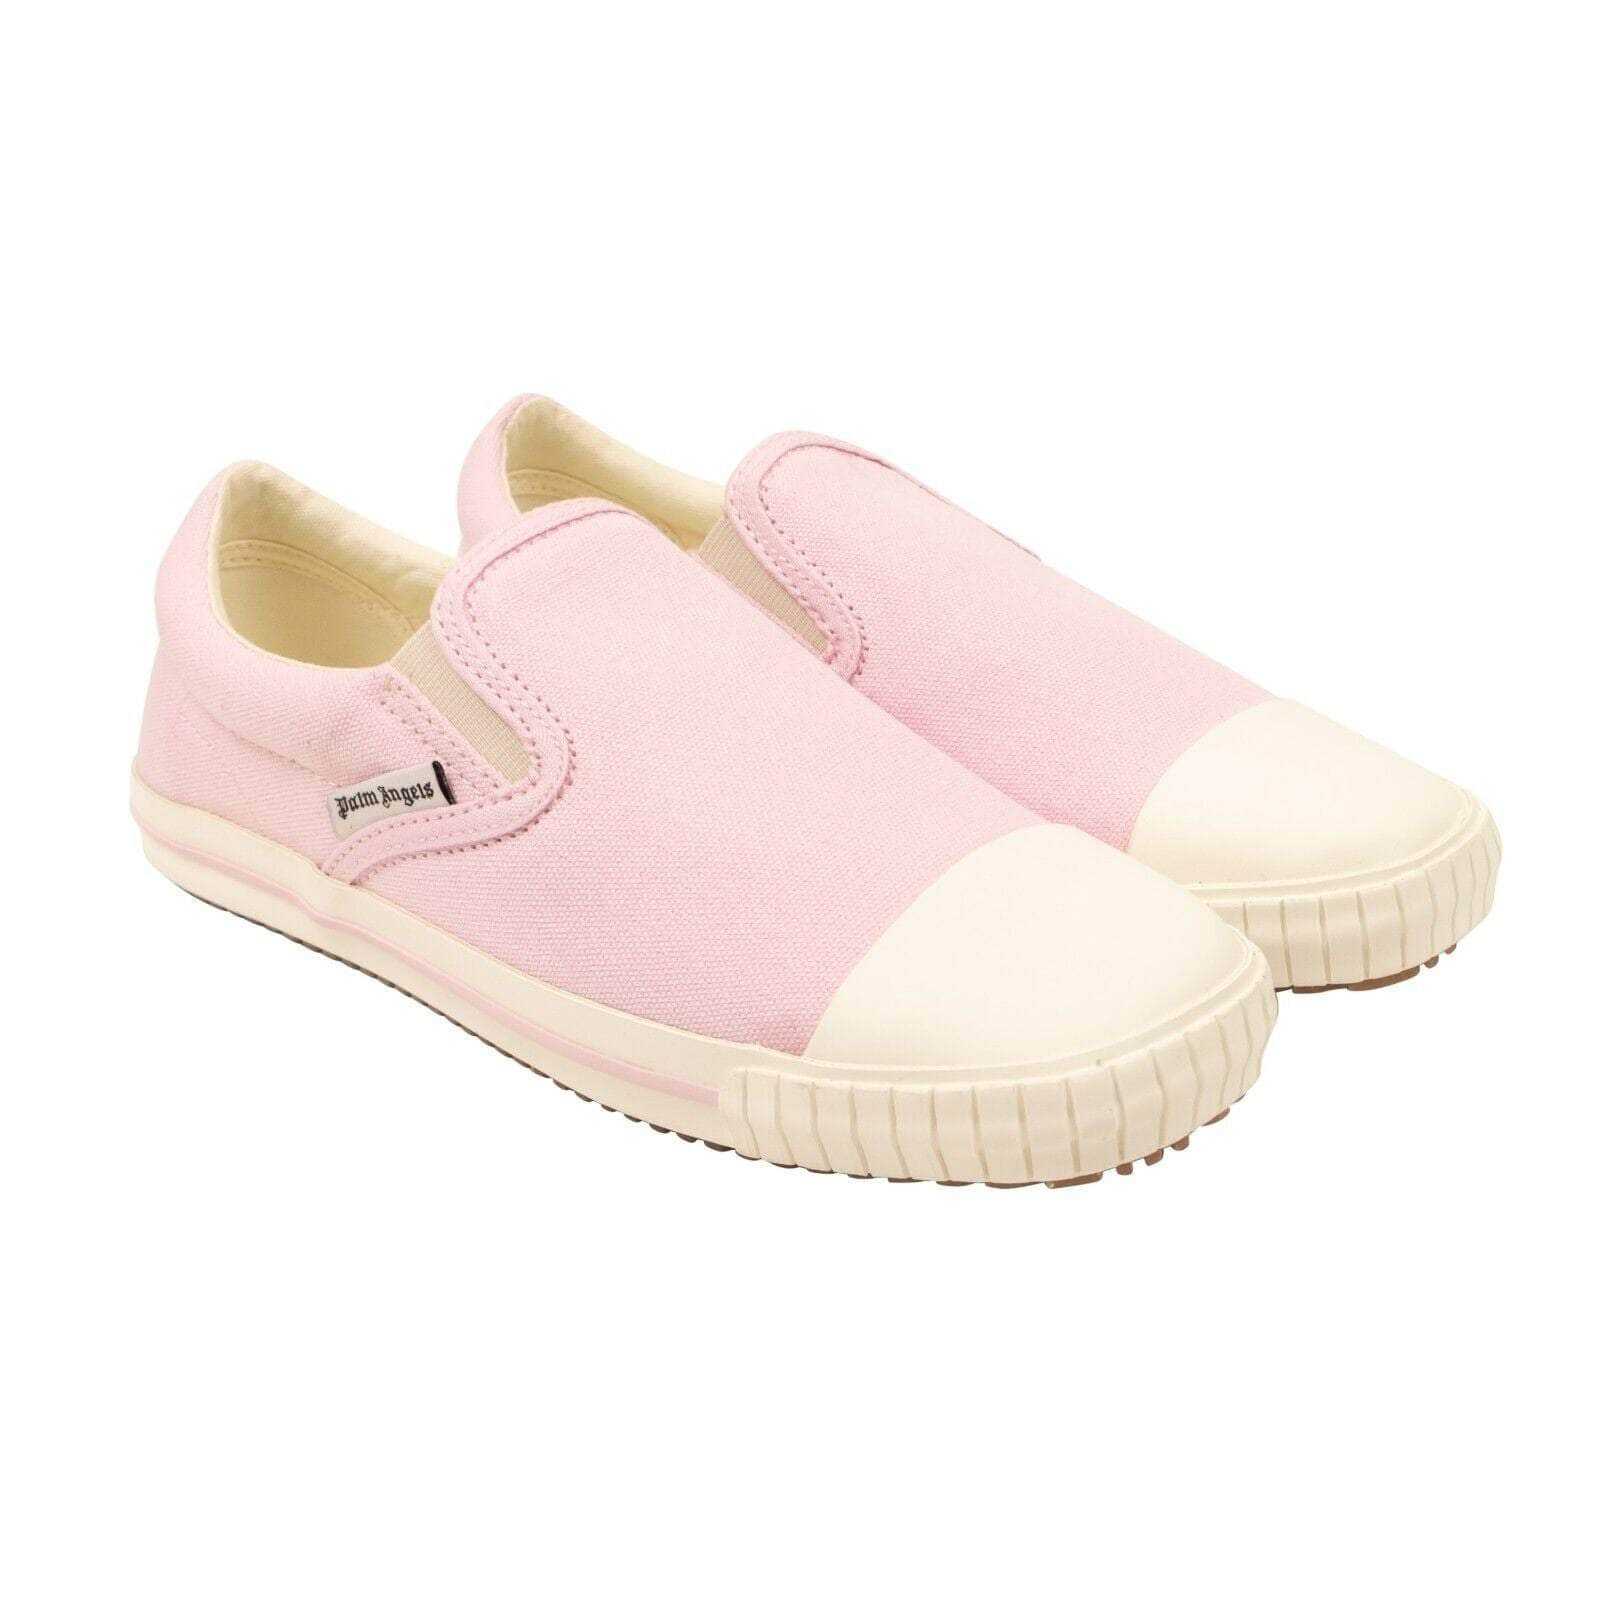 Palm Angels channelenable-all, chicmi, couponcollection, gender-womens, main-shoes, palm-angels, size-36, size-37, size-39, under-250 Pink Vulcanized Square Slip On Canvas Sneakers